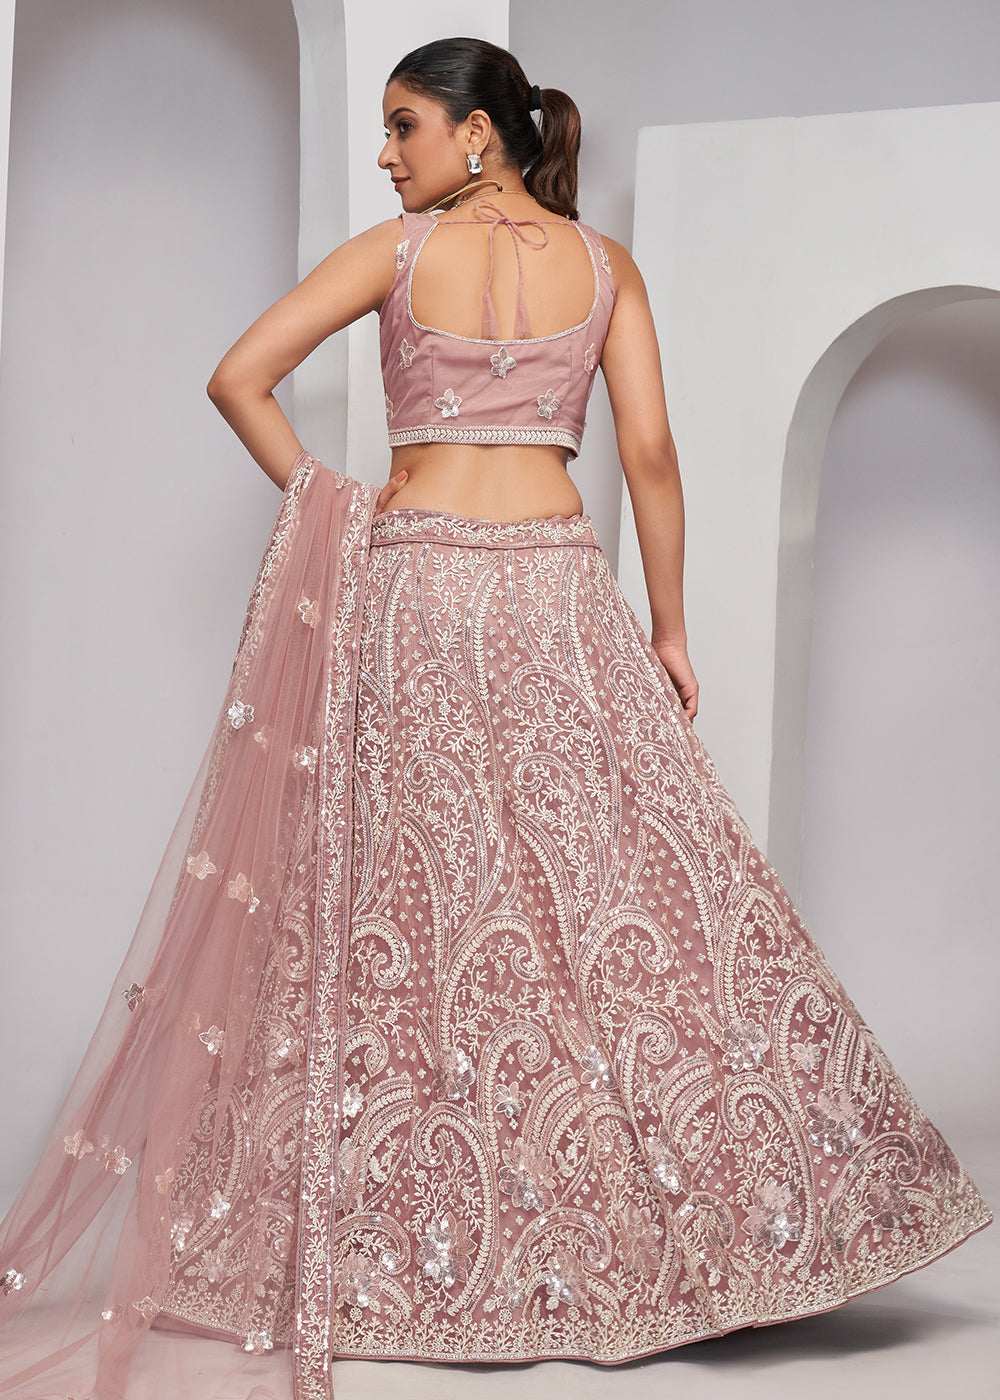 Buy Now Luxurious Chickoo Peach Heavy Embroidered Bridal Lehenga Choli Online in USA, UK, Canada & Worldwide at Empress Clothing. 